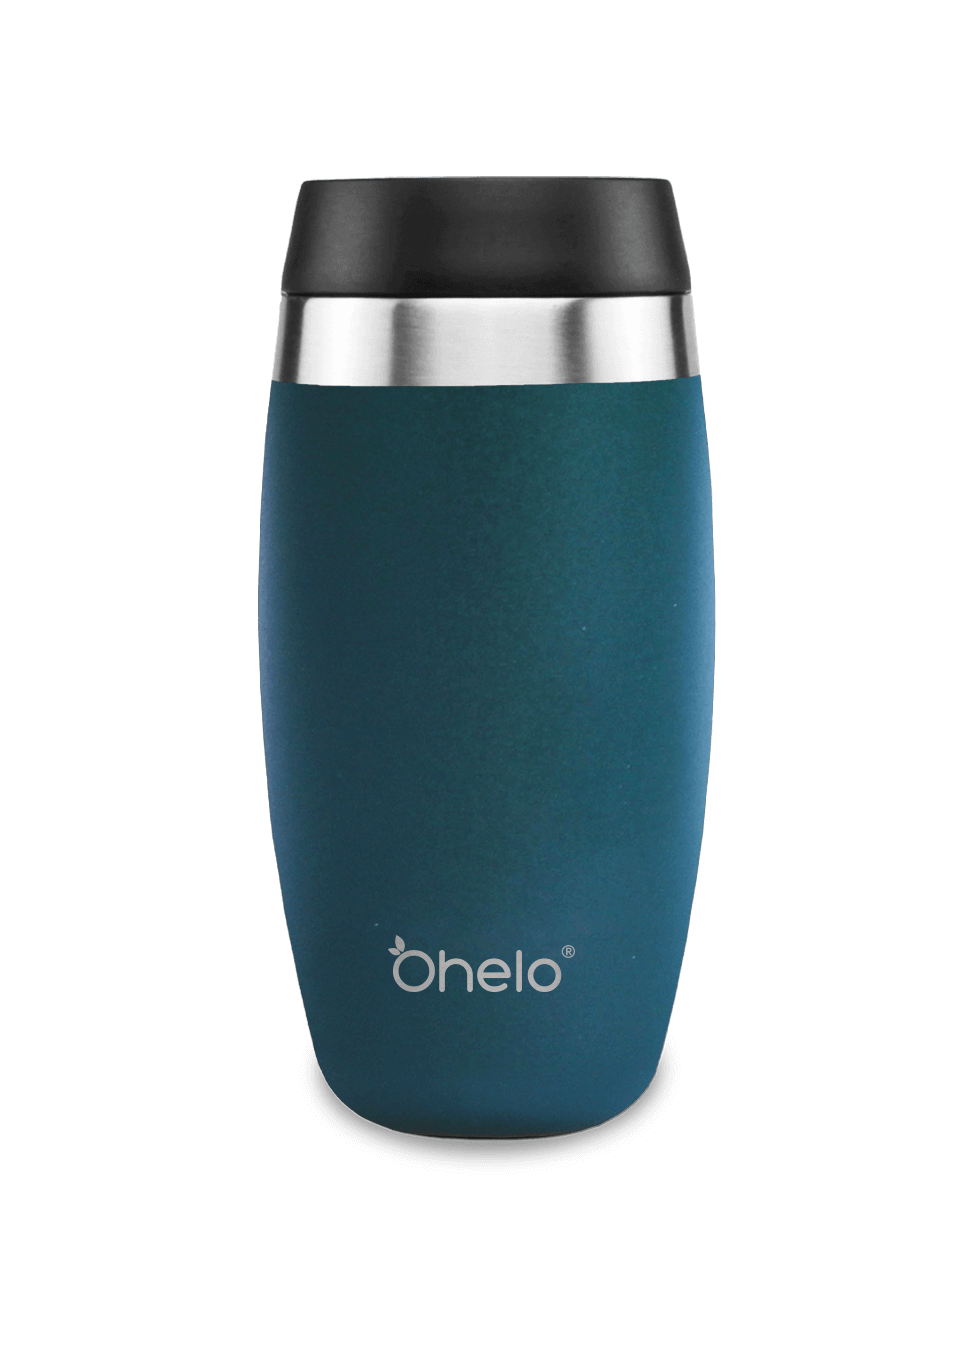 Ohelo insulated reusable tumbler 400ml in British racing green